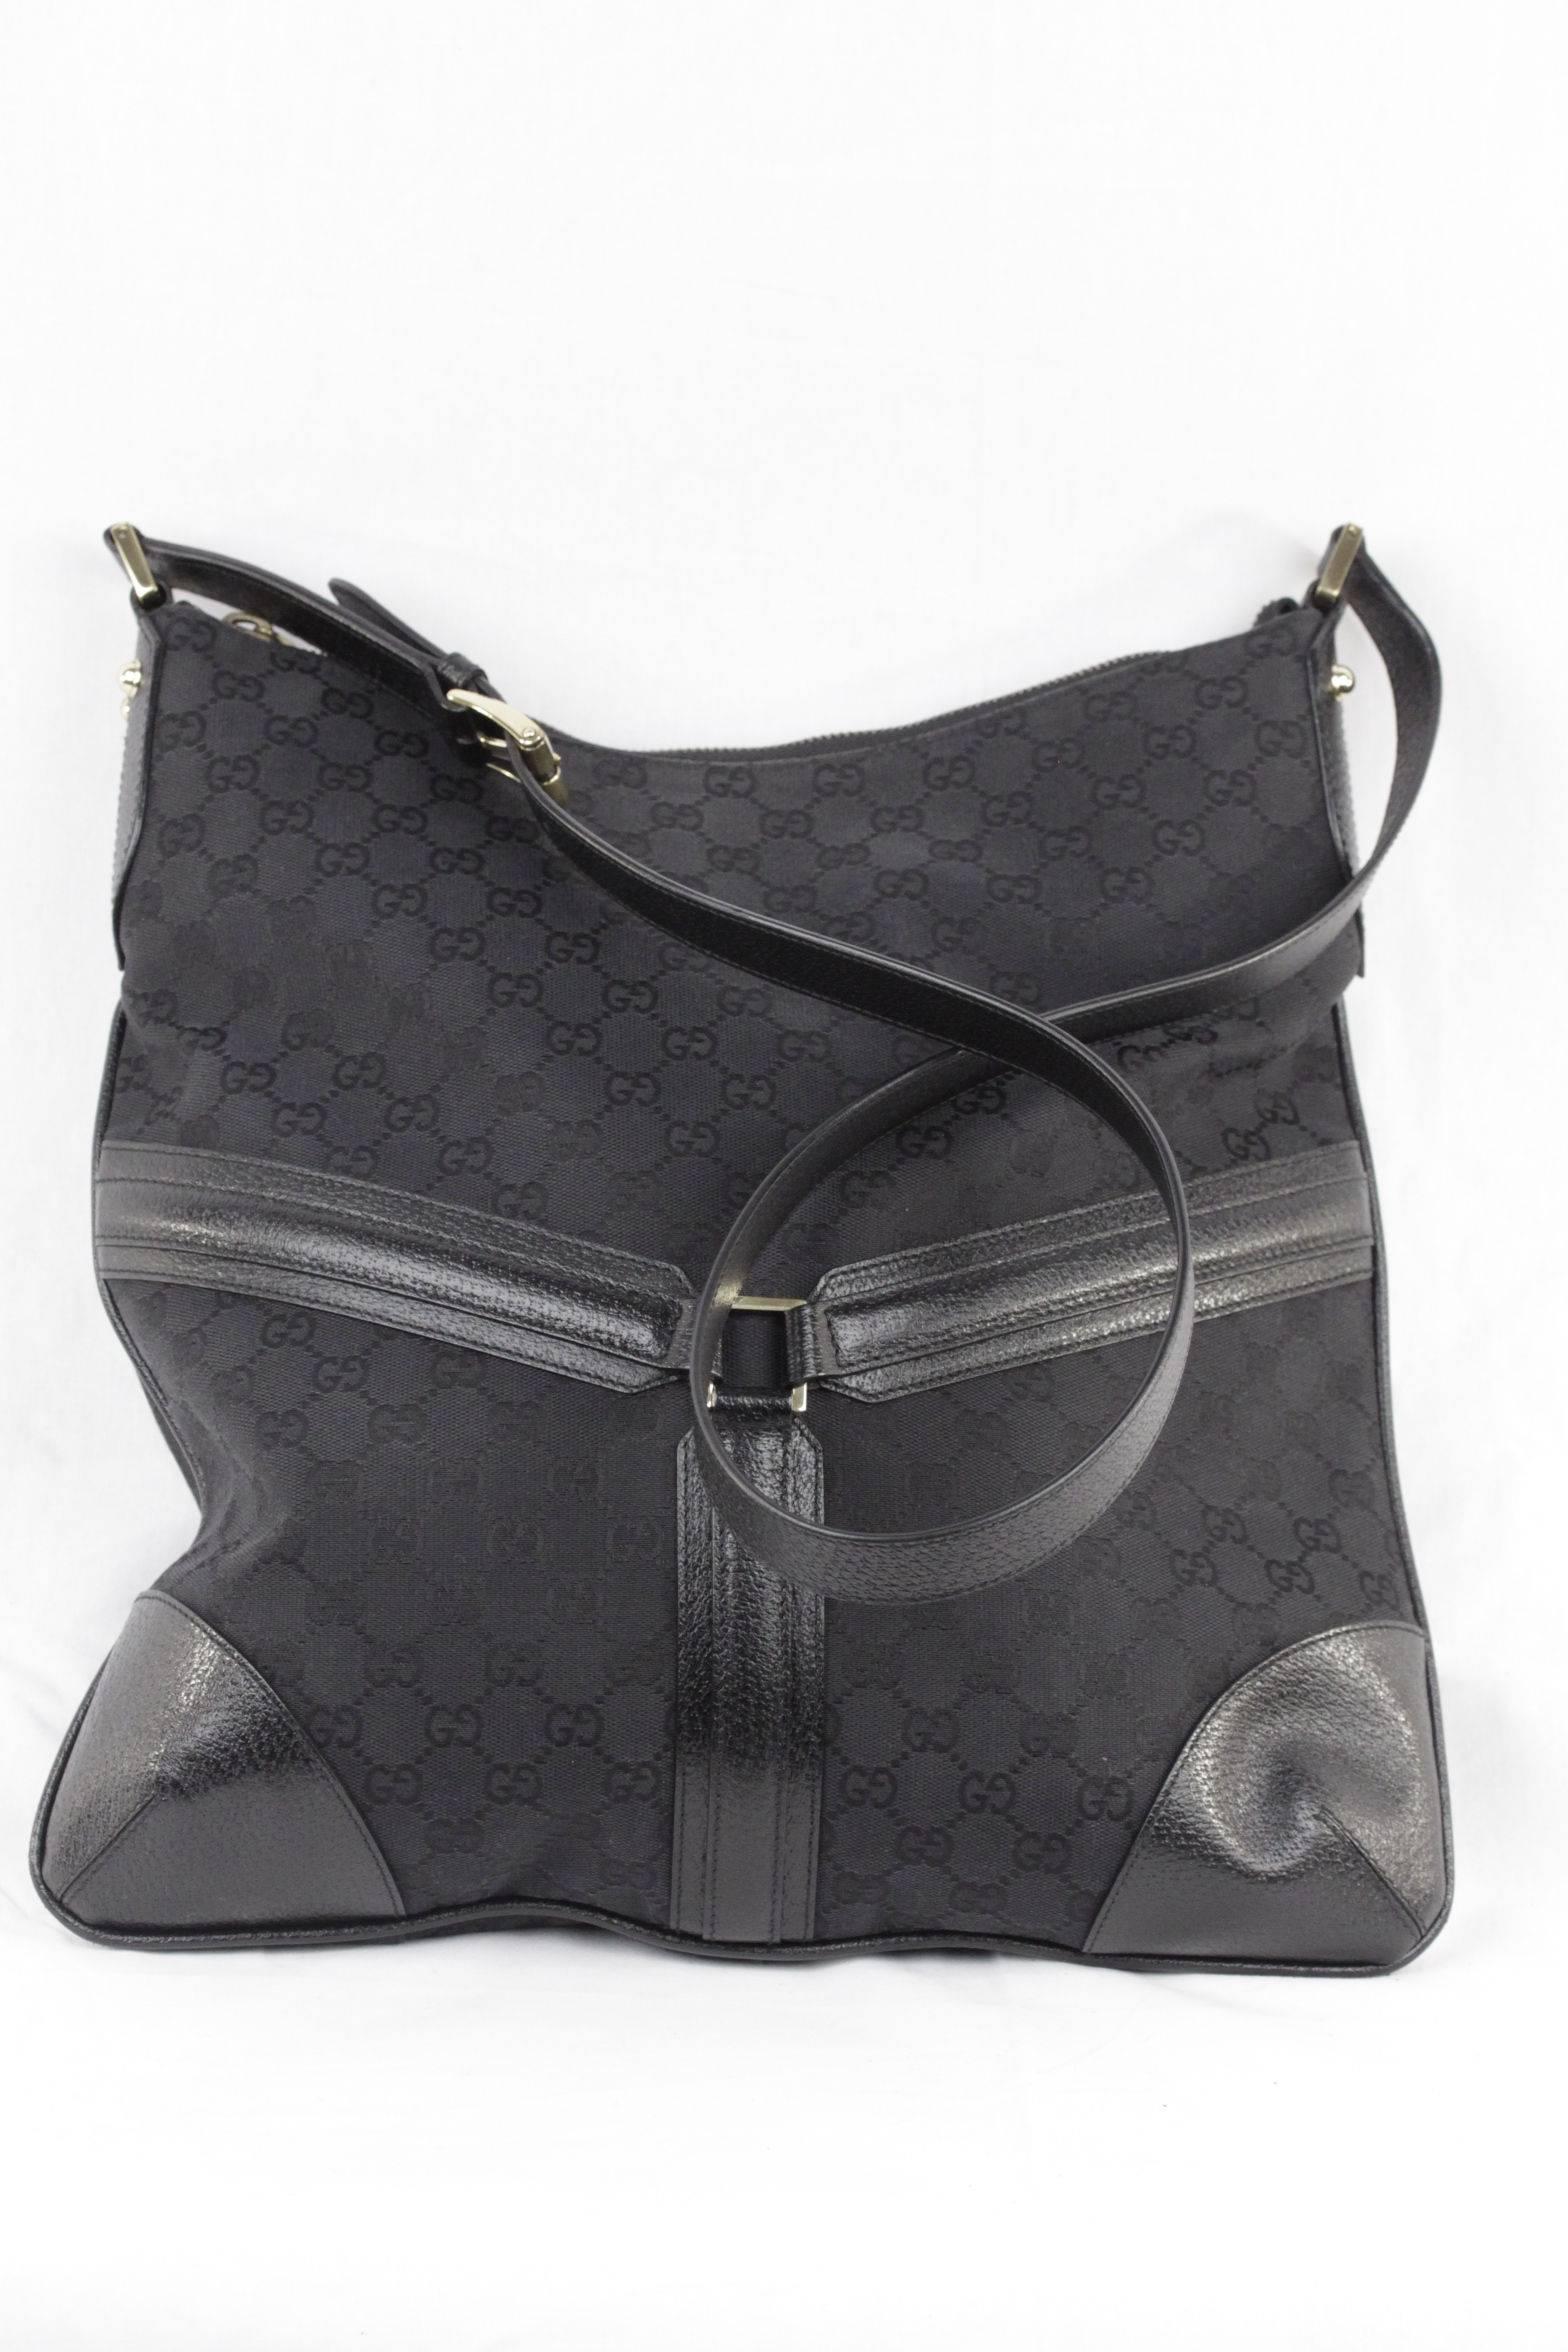  - Gold metal GG - GUCCI logo detail on the front
- Crafted in GG monogram canvas with leather trim
- Upper zipper closure
- Black canvas lining
- 1 side zip pocket inside
- Adjustable shoulder strap
- Approx. measurements: 16 x 15 1/2 x 2